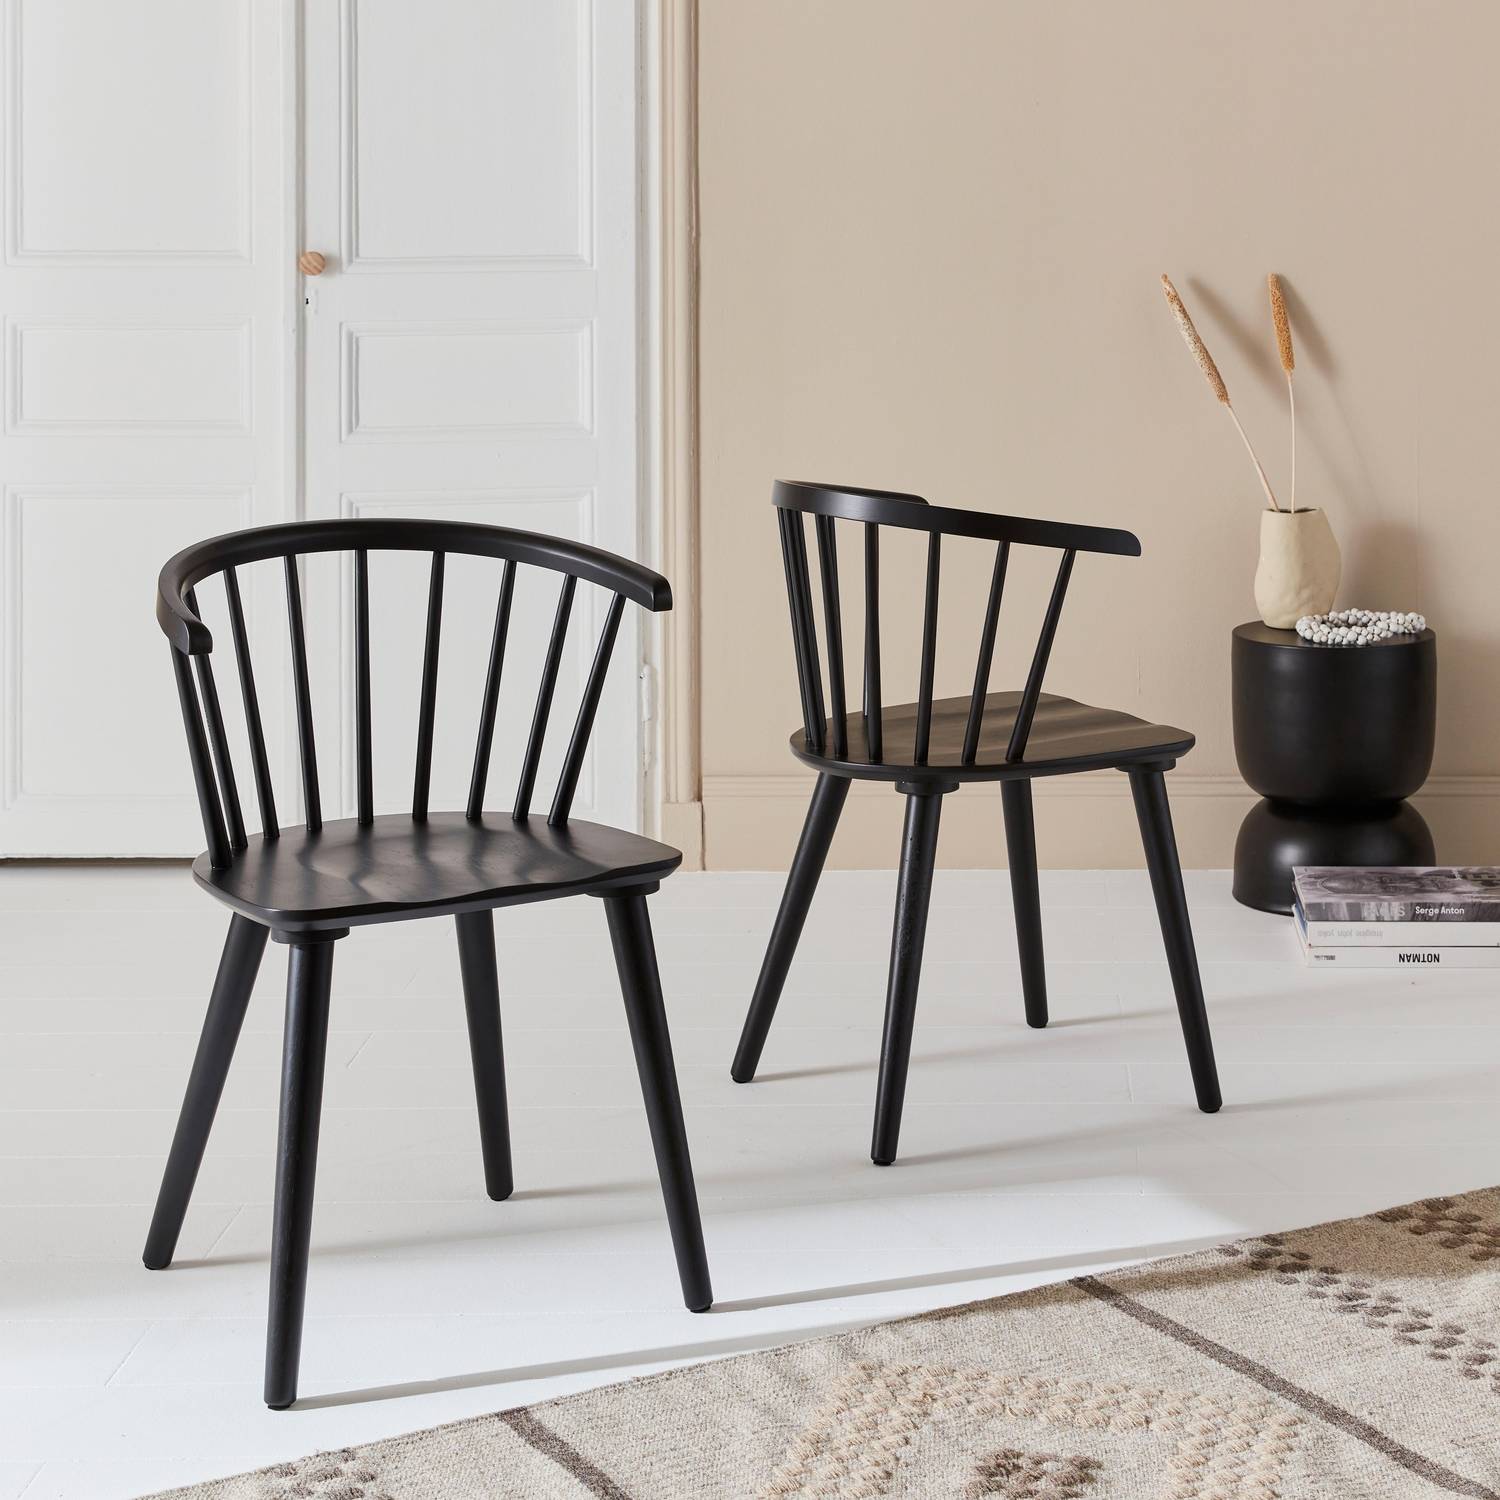 Pair of  Wood and Plywood Spindle Chairs, black, L53 x W47.5 x H76cm  Photo2